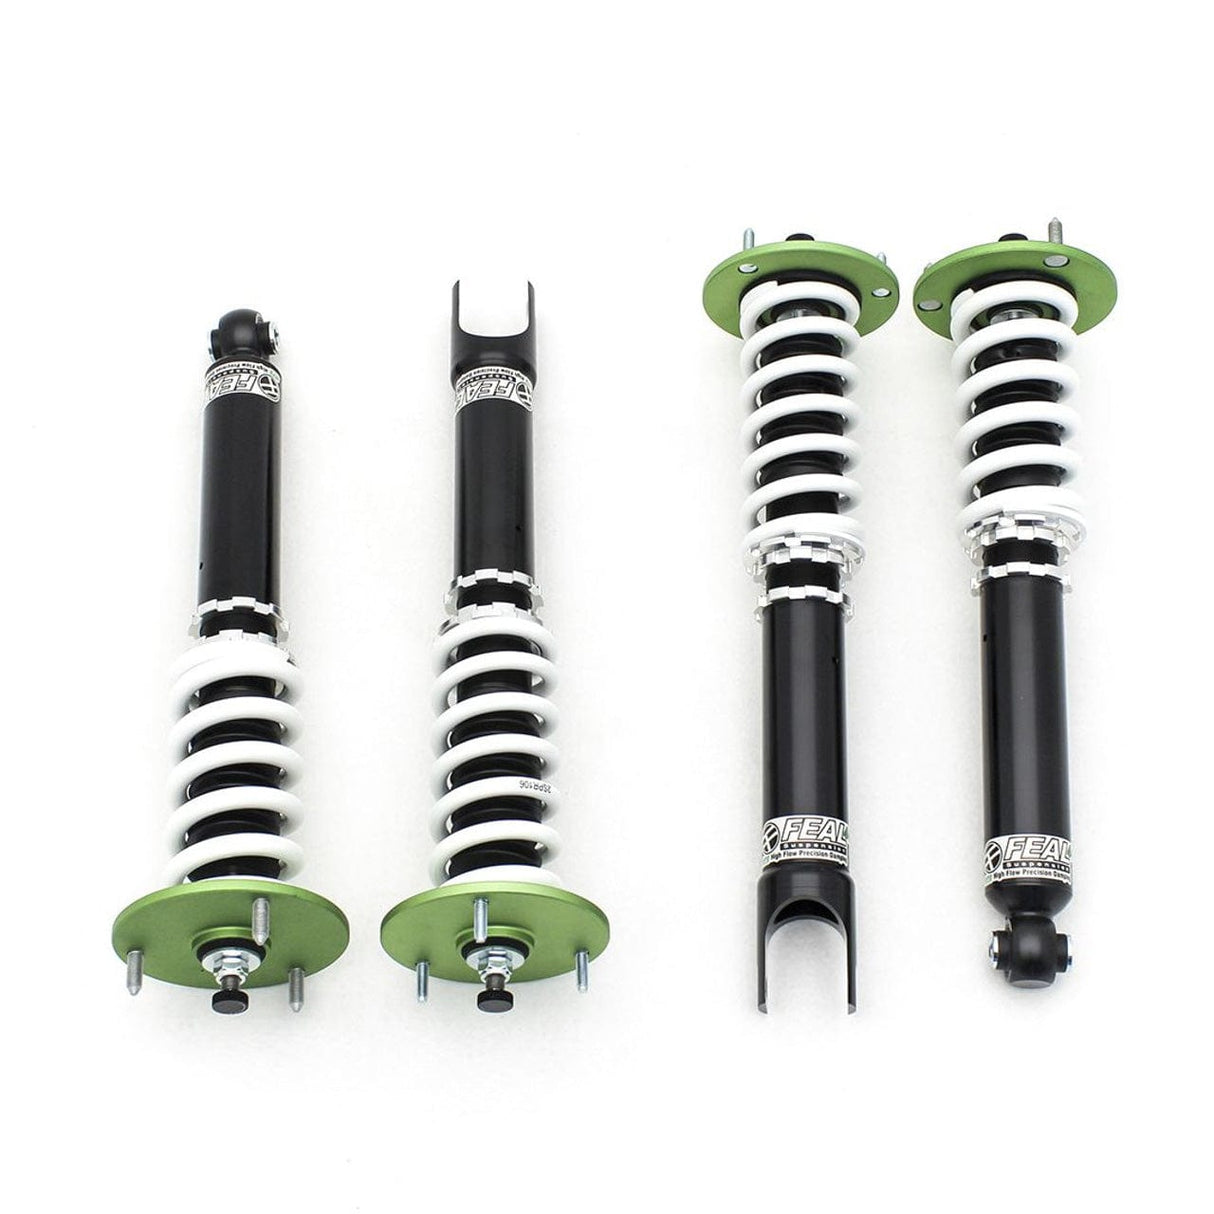 Feal 441 Coilovers (True Rear) - 1994-1998 Ford Mustang Cobra